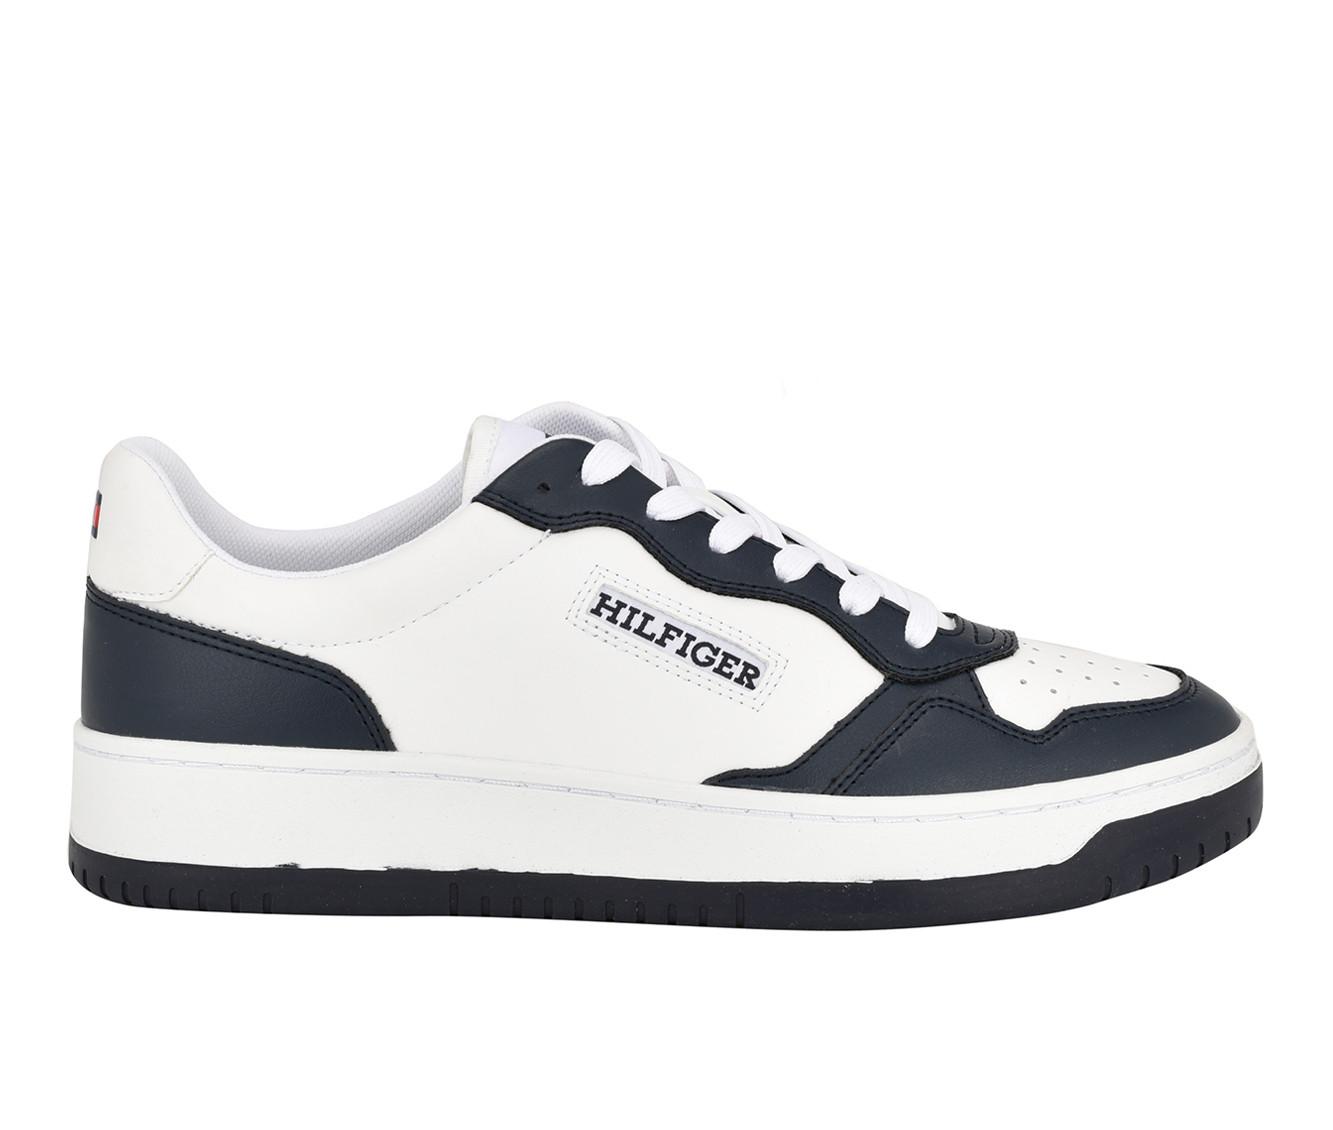 Men's Tommy Hilfiger Inkas Fashion Sneakers